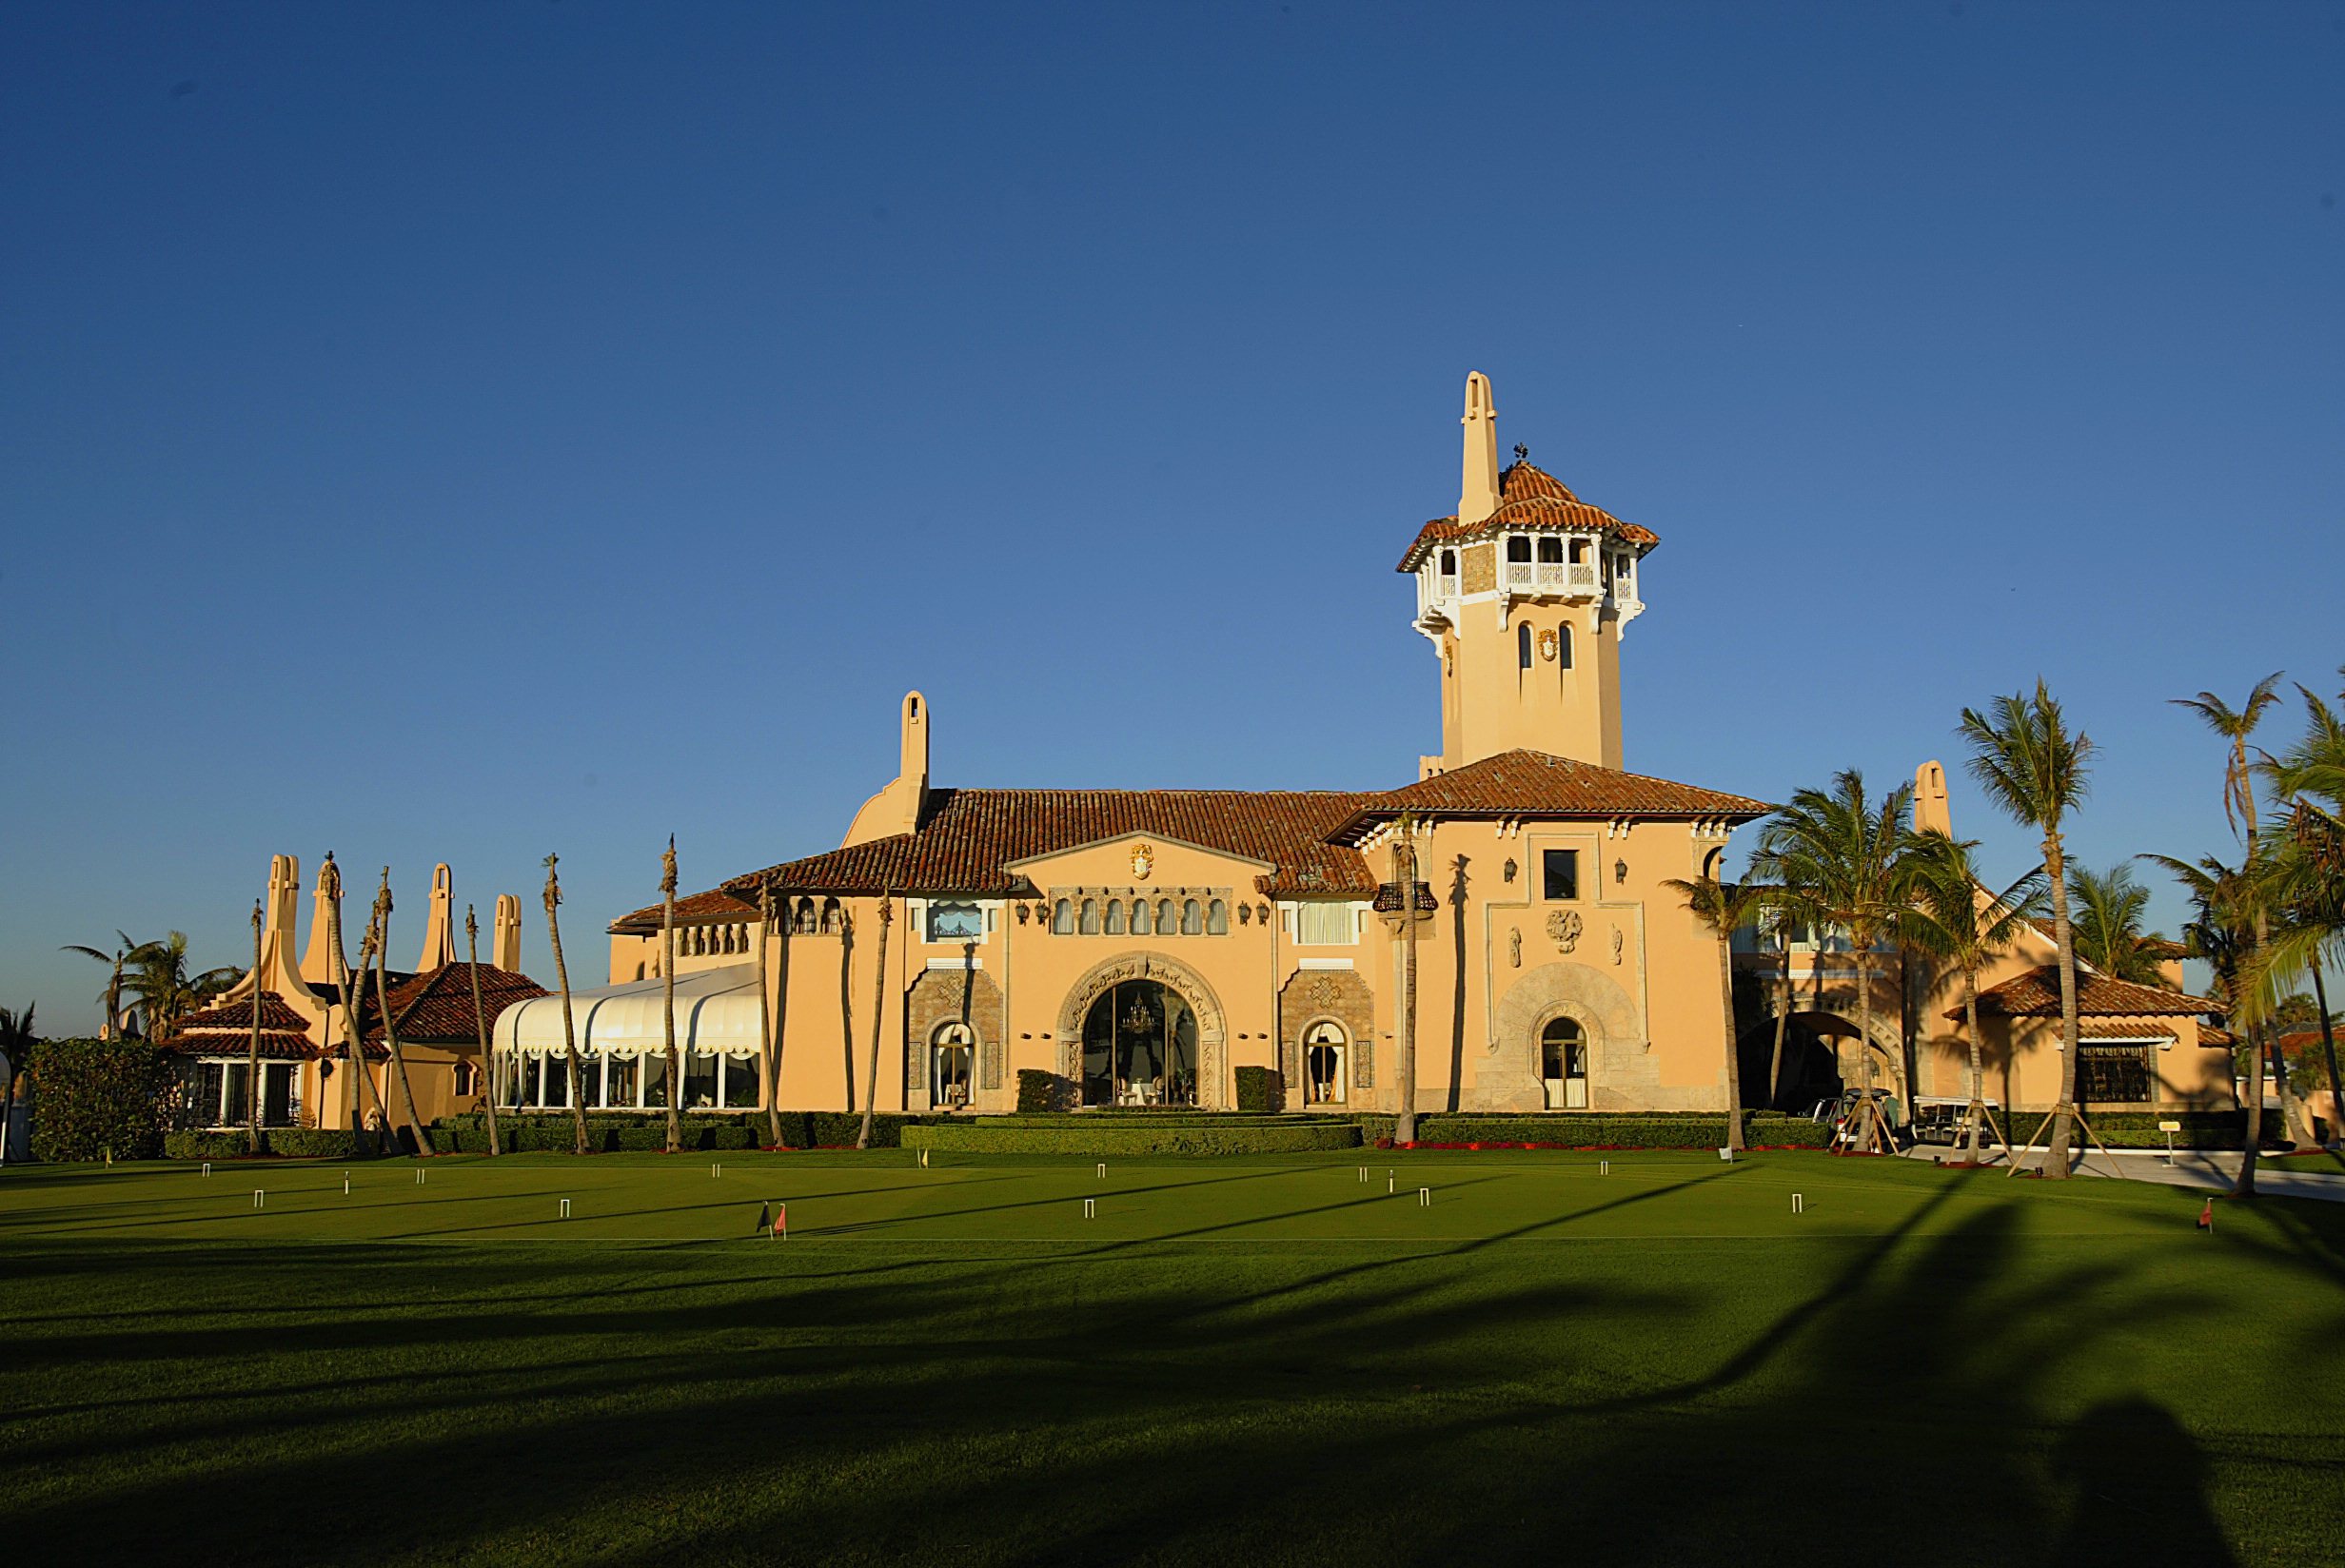 At Donald Trump's Mar-a-Lago club, the price for joining 'Winter